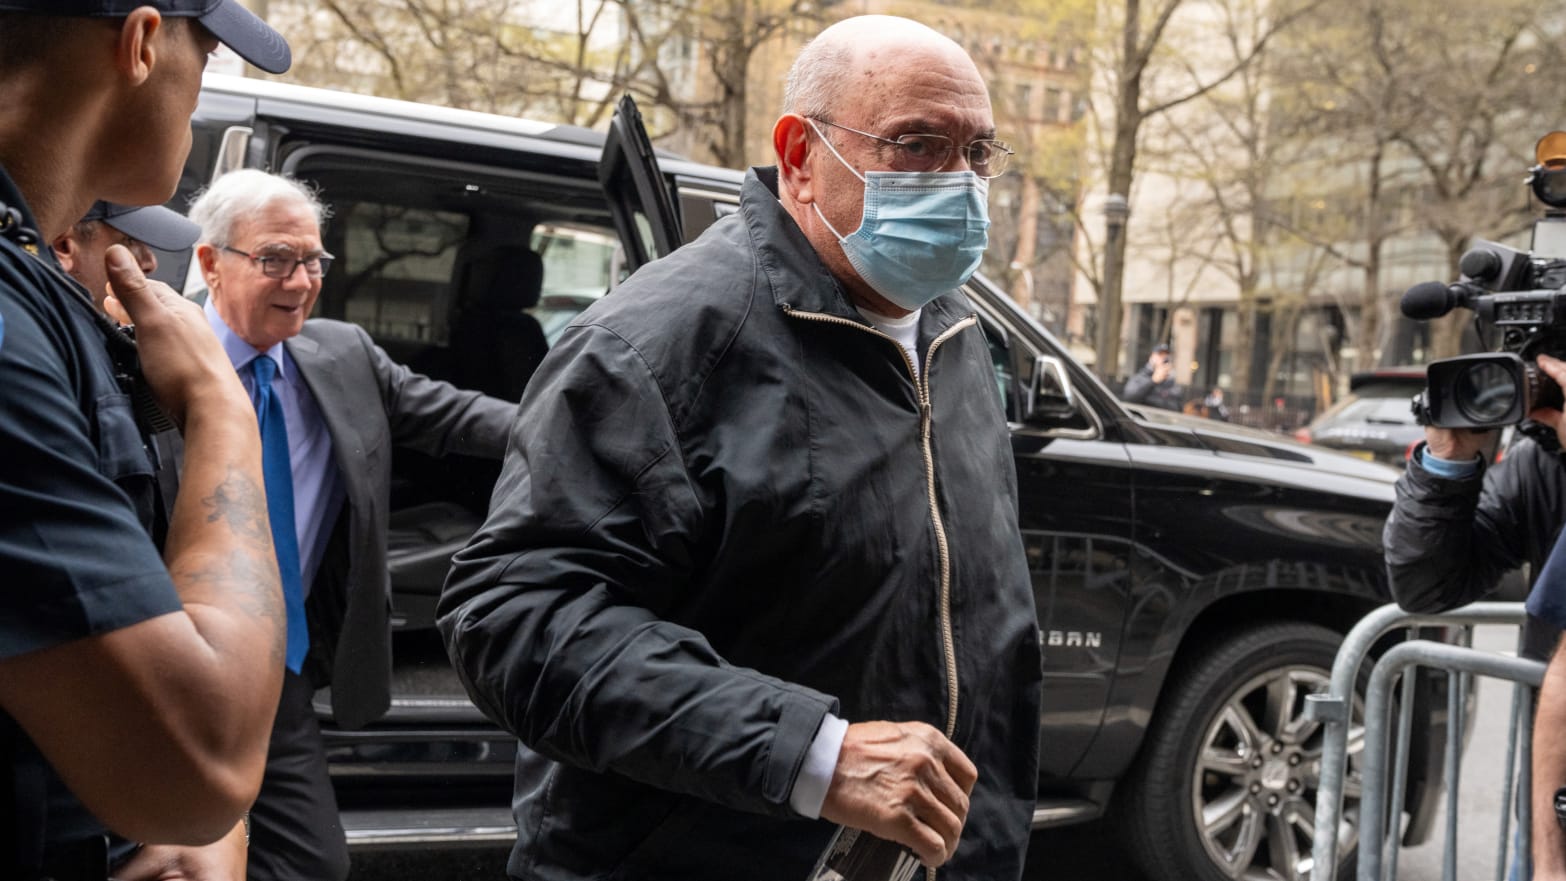 Allen Weisselberg, dressed in all black and wearing a surgical mask, walks into court.